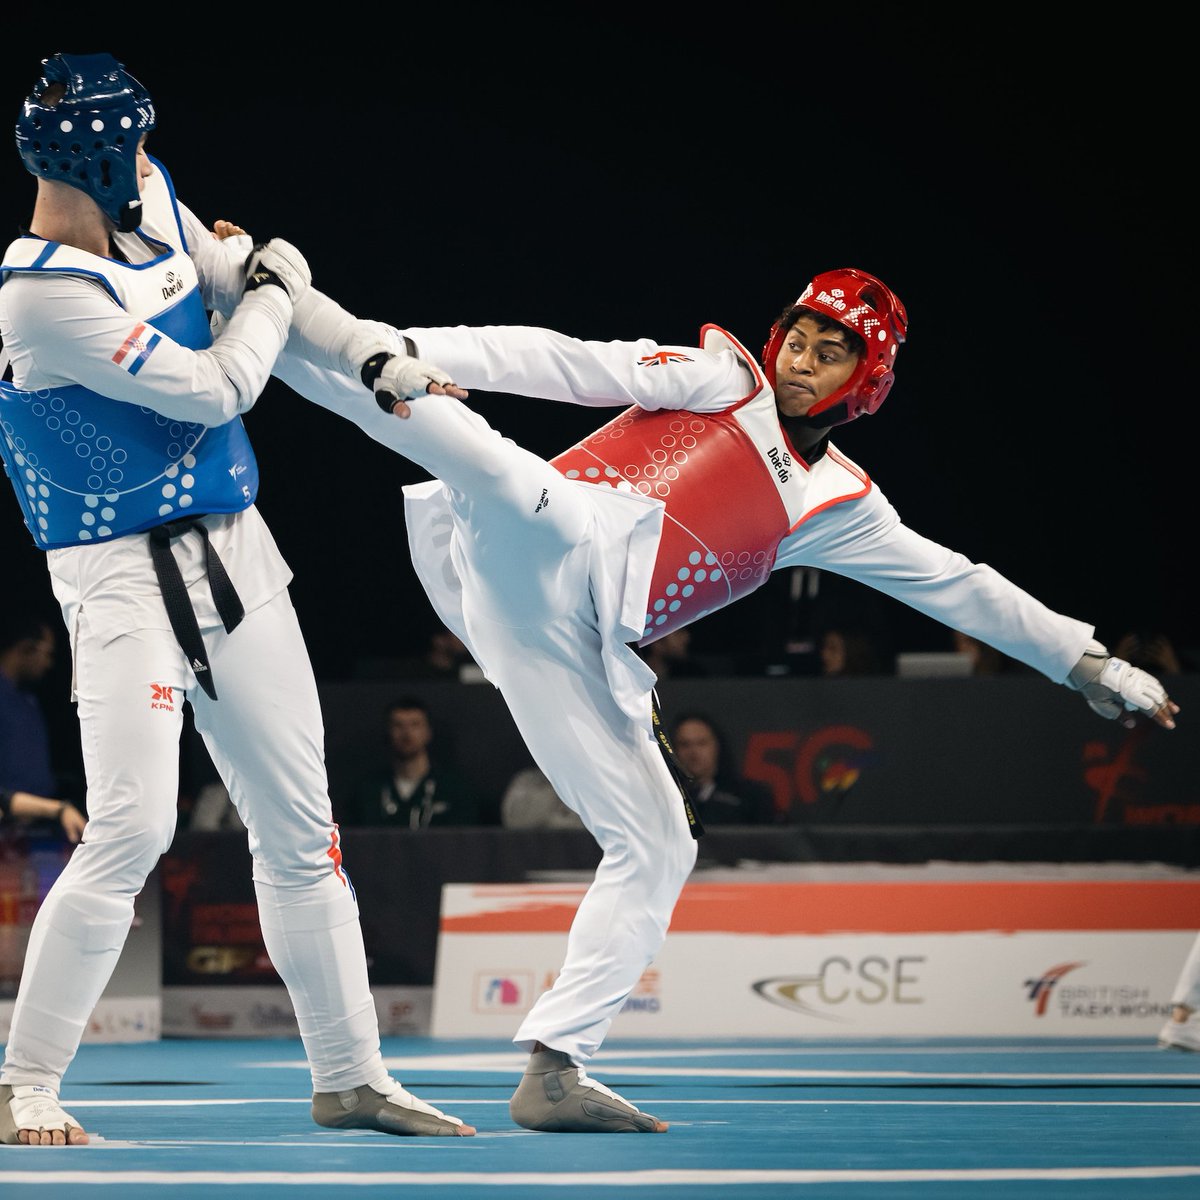 Getting it done 💪 @CadenCunn1ngham has punched Team GB's ticket to #Paris2024 in the men's +87kg🎟️ He reached the round of 16 at the World Taekwondo Grand Prix Final in Manchester 👏 📸 @sammellishphoto